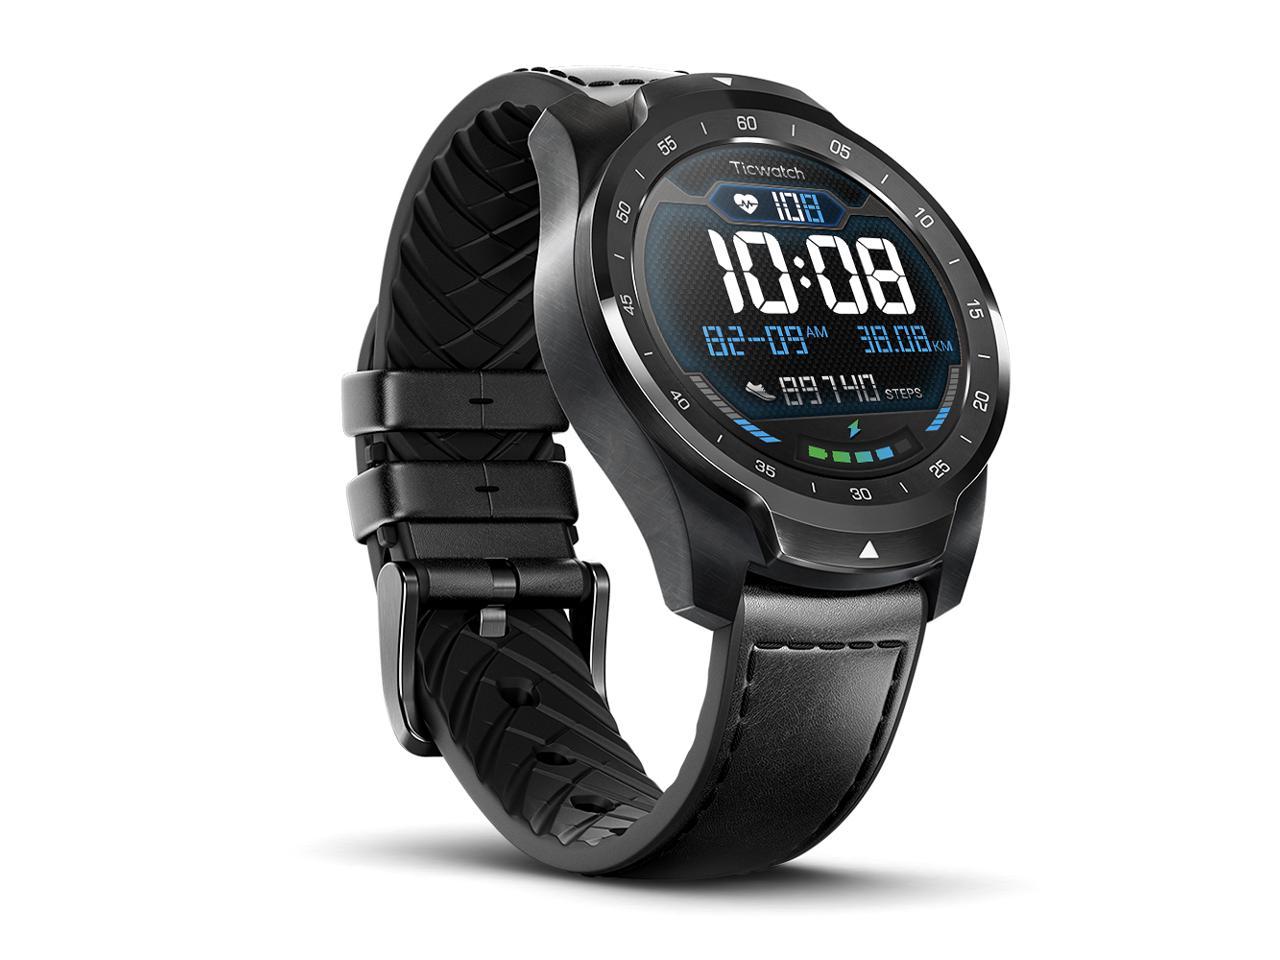 Ticwatch Pro 2020 Smartwatch 1GB RAM, GPS Layered Display Long Battery Life, Wear OS by Google, NFC, 24H Heart Rate, Sleep Tracking, Music, IP68 Water Resistance, Compatible with Android/iOS, Black